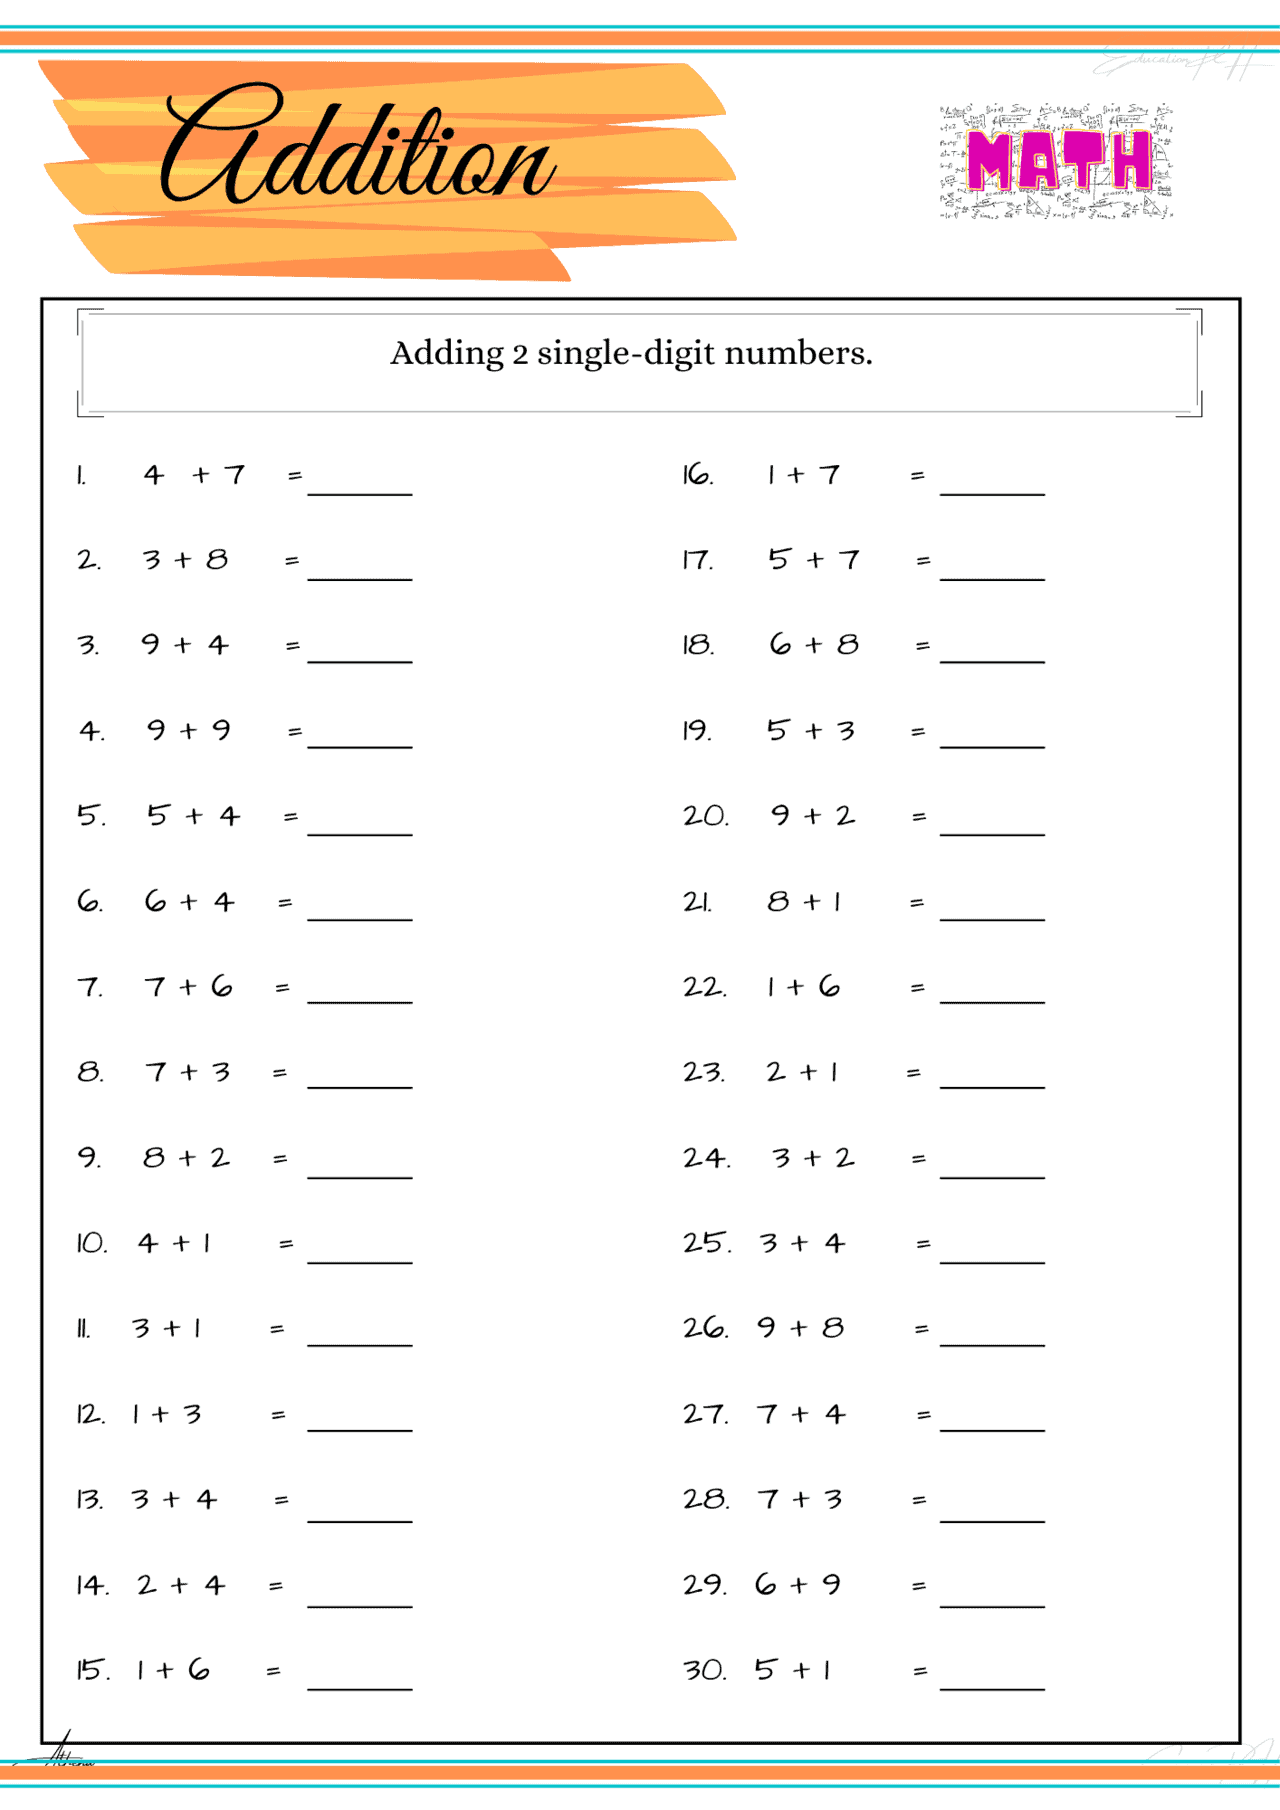 Primary School Maths Addition Worksheets